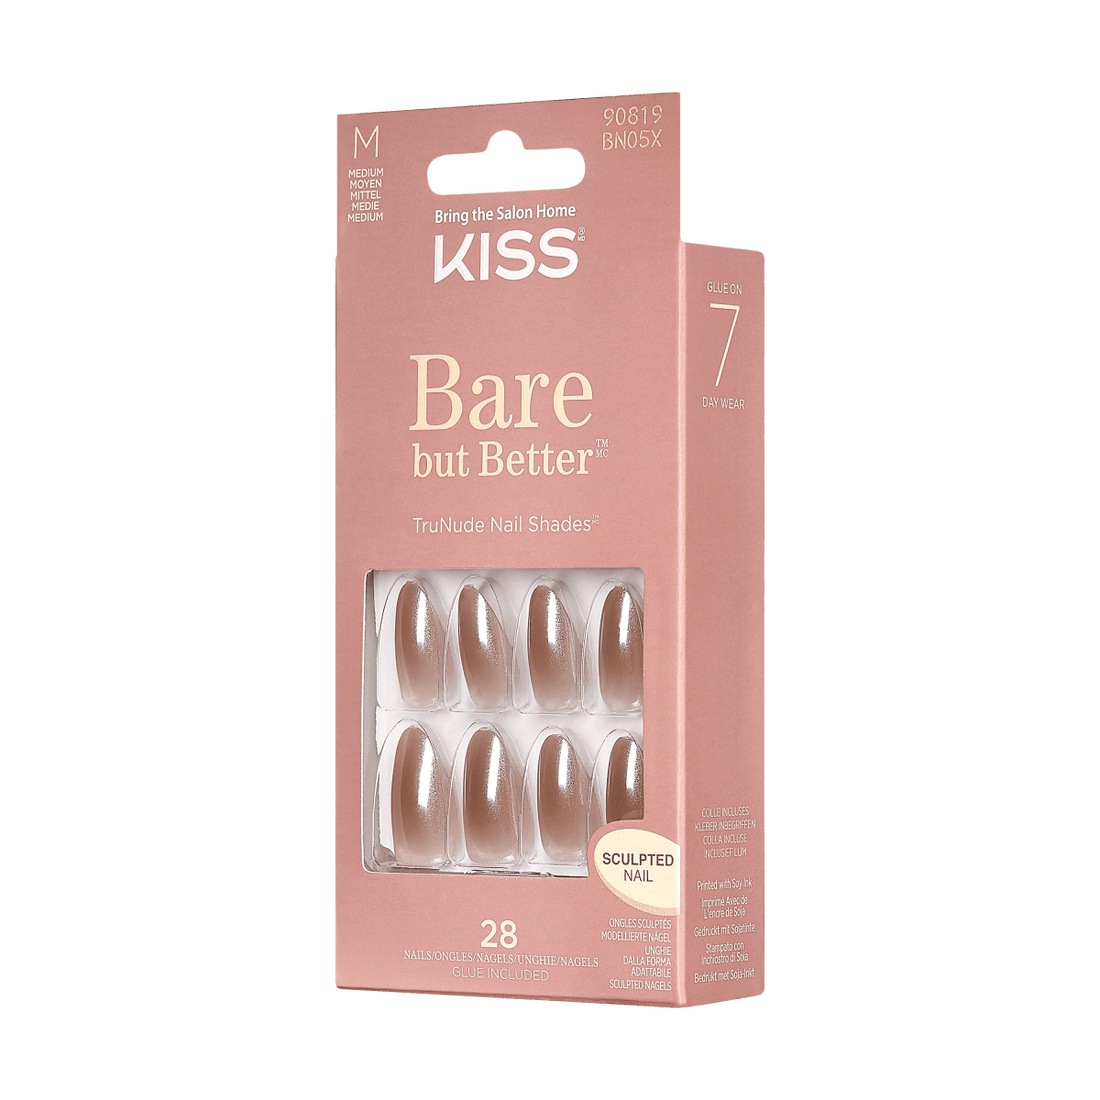 KISS Bare But Better, Press-On Nails, Pudding, Beige, Med Almond, 28ct